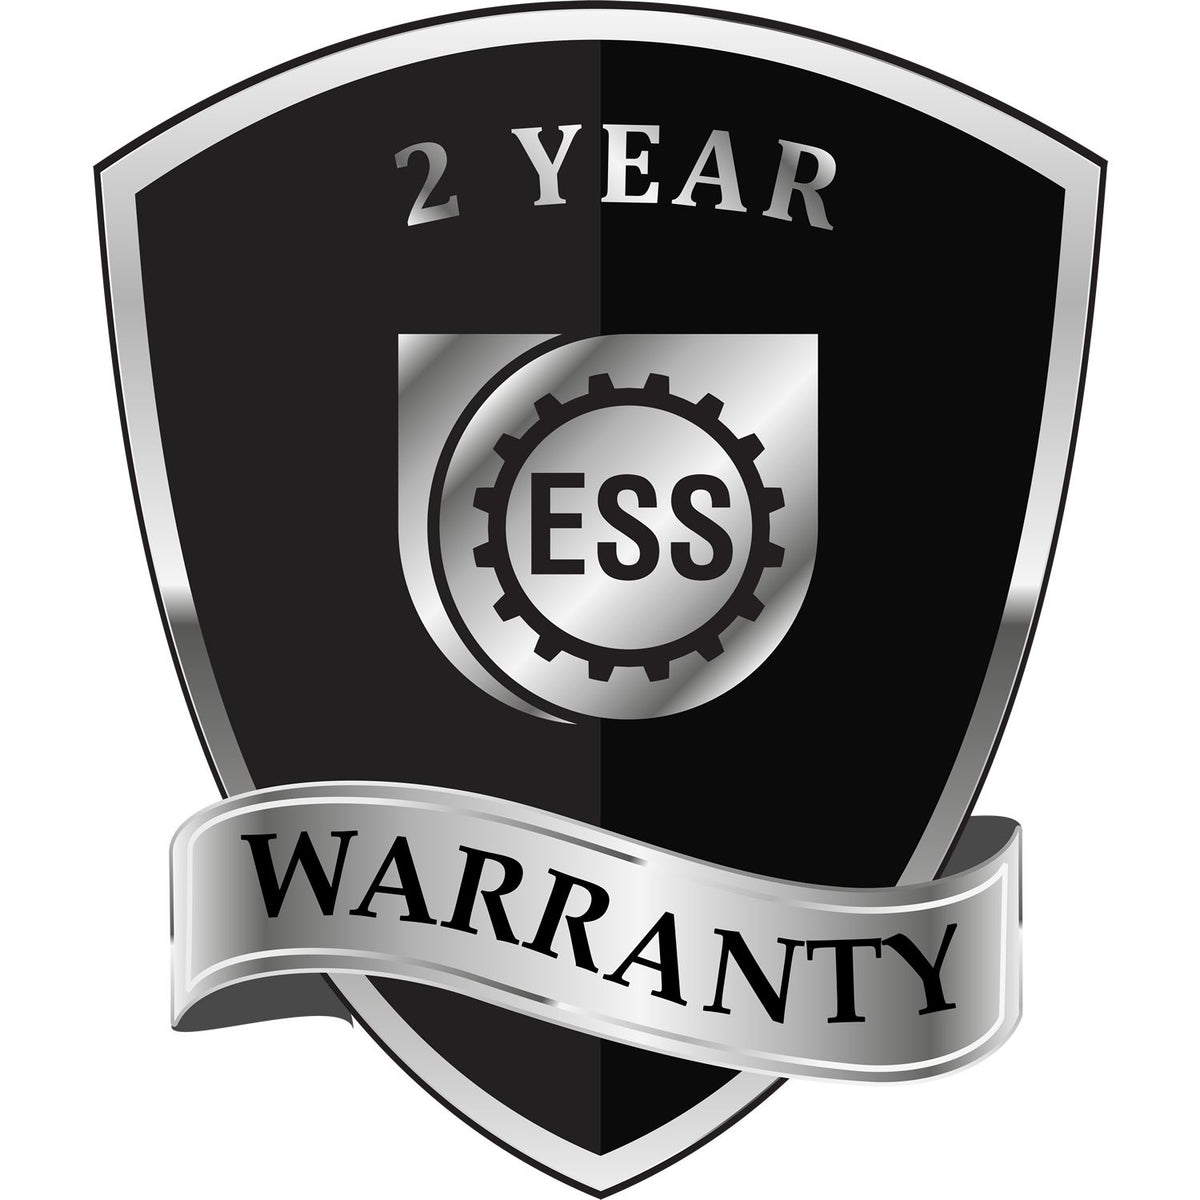 A black and silver badge or emblem showing warranty information for the Hybrid District of Columbia Engineer Seal